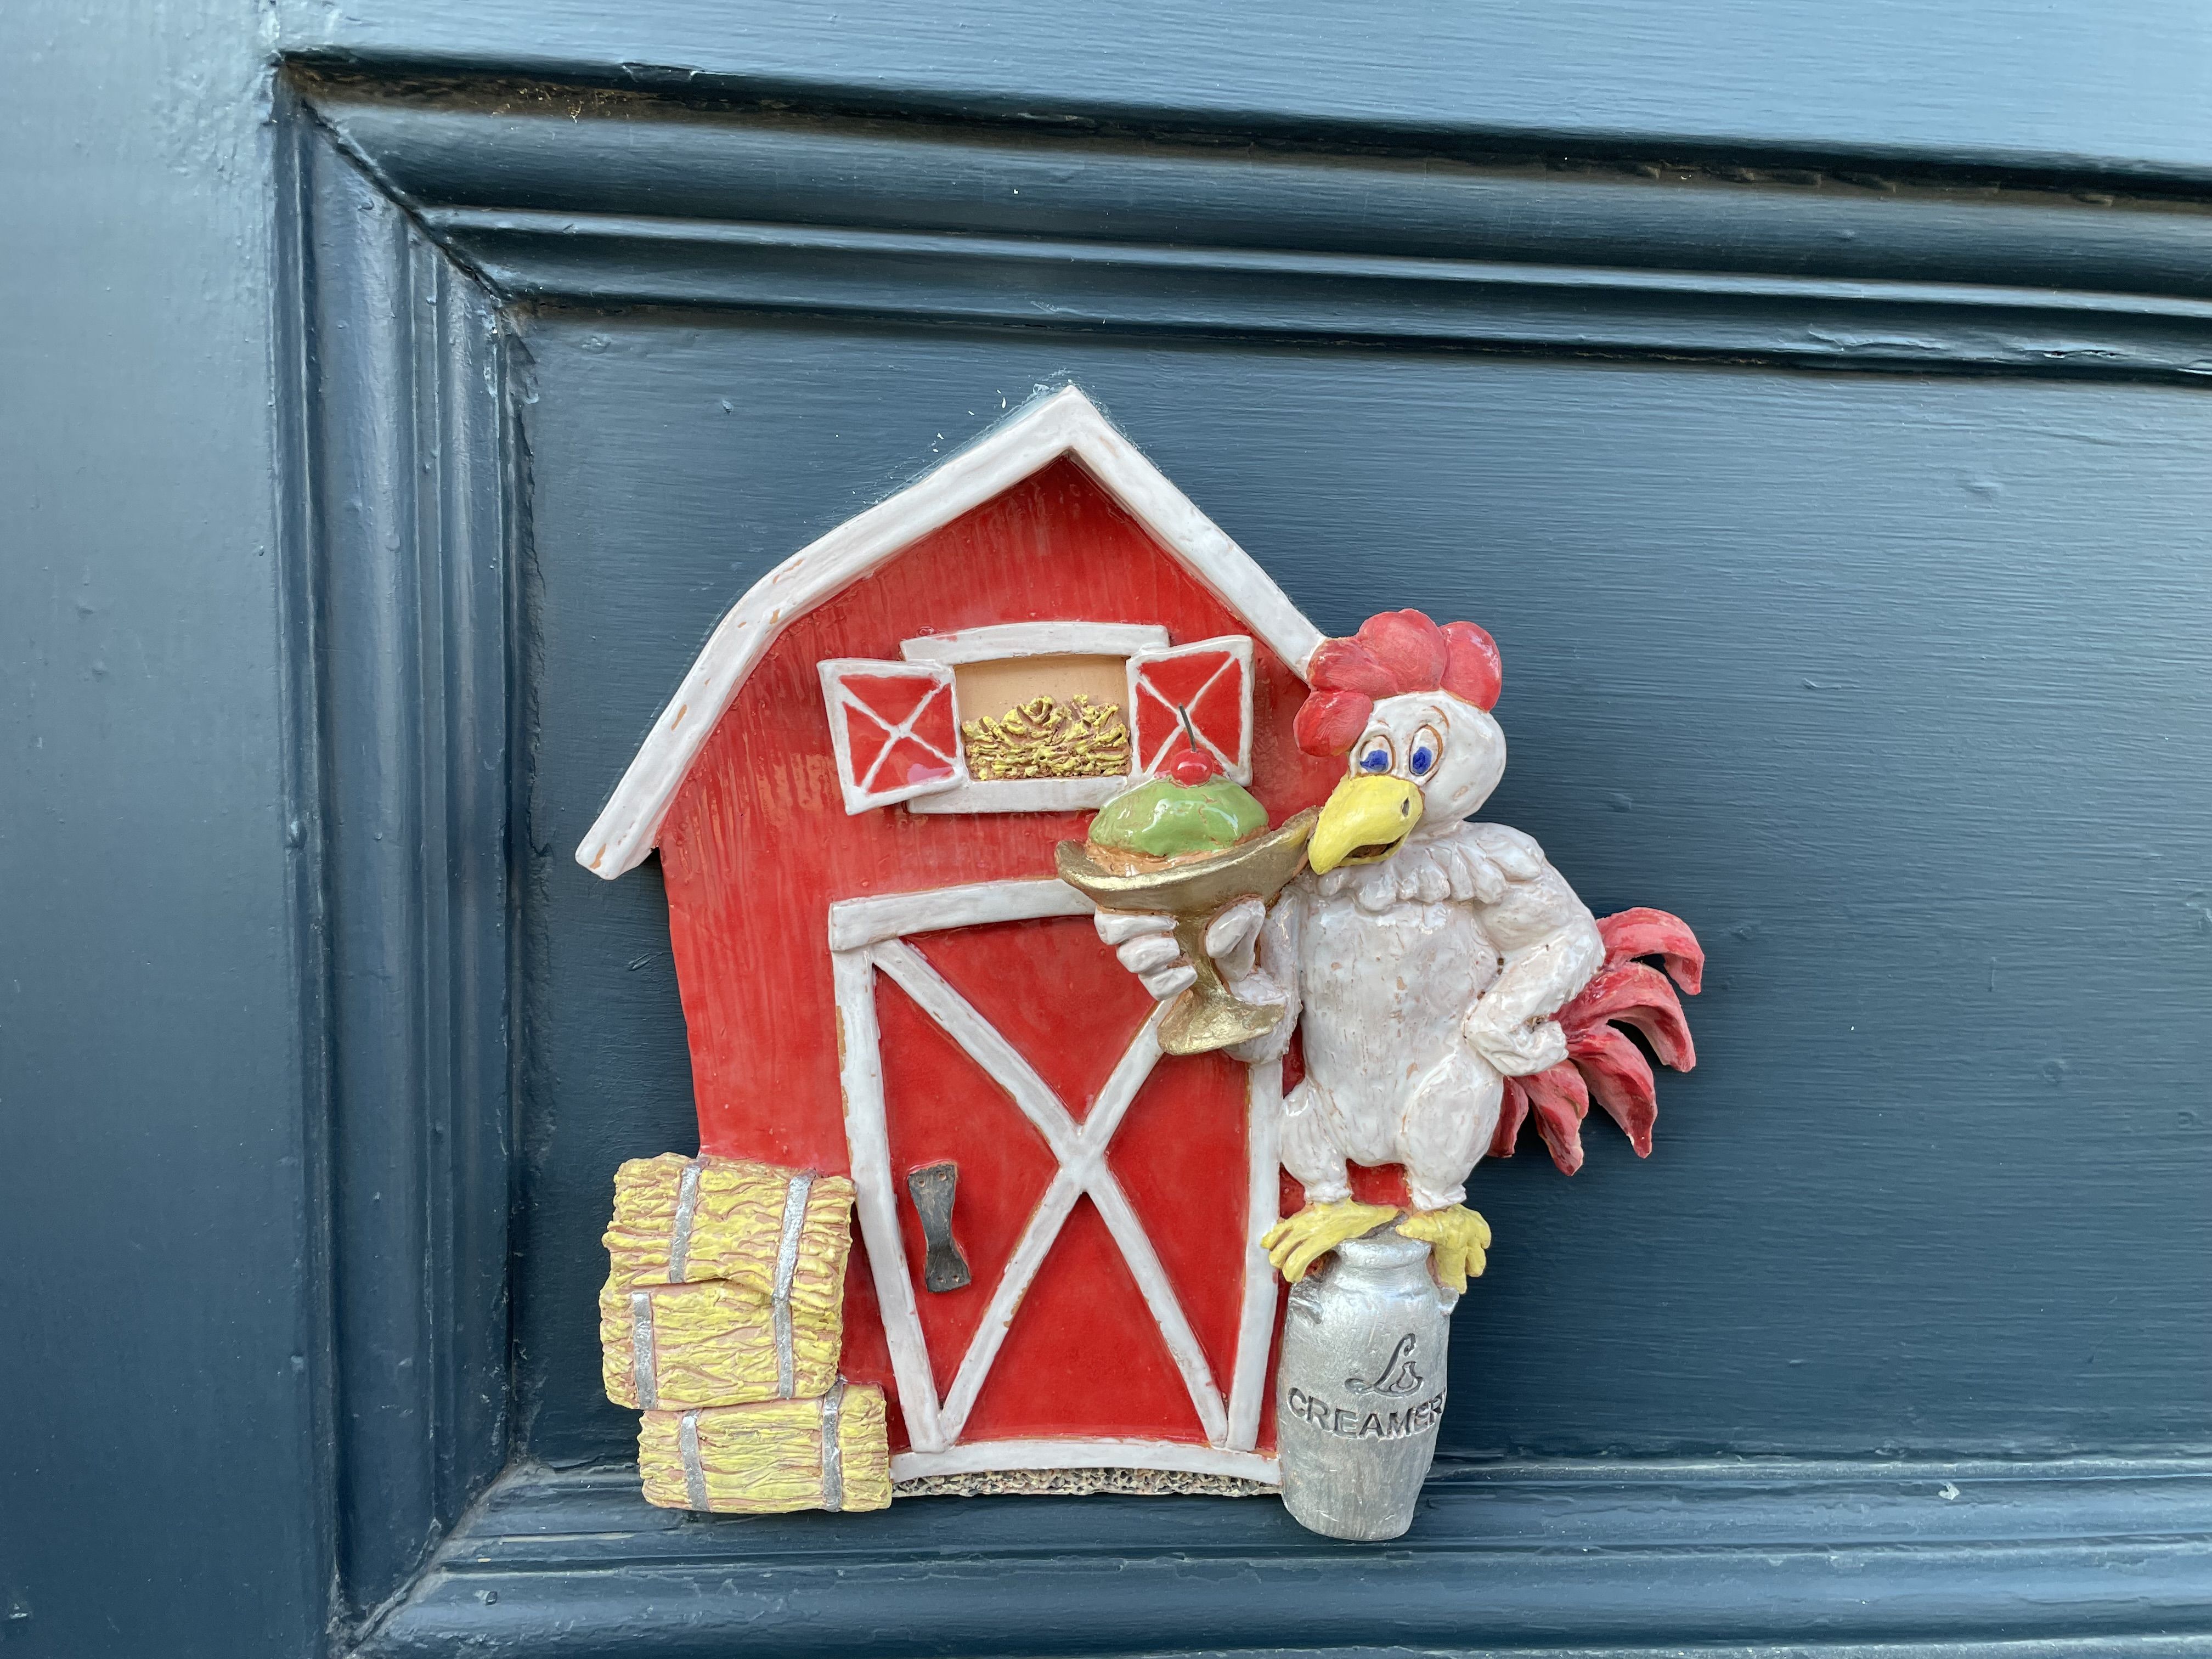 A tiny barn-style door and a tiny plaster chicken